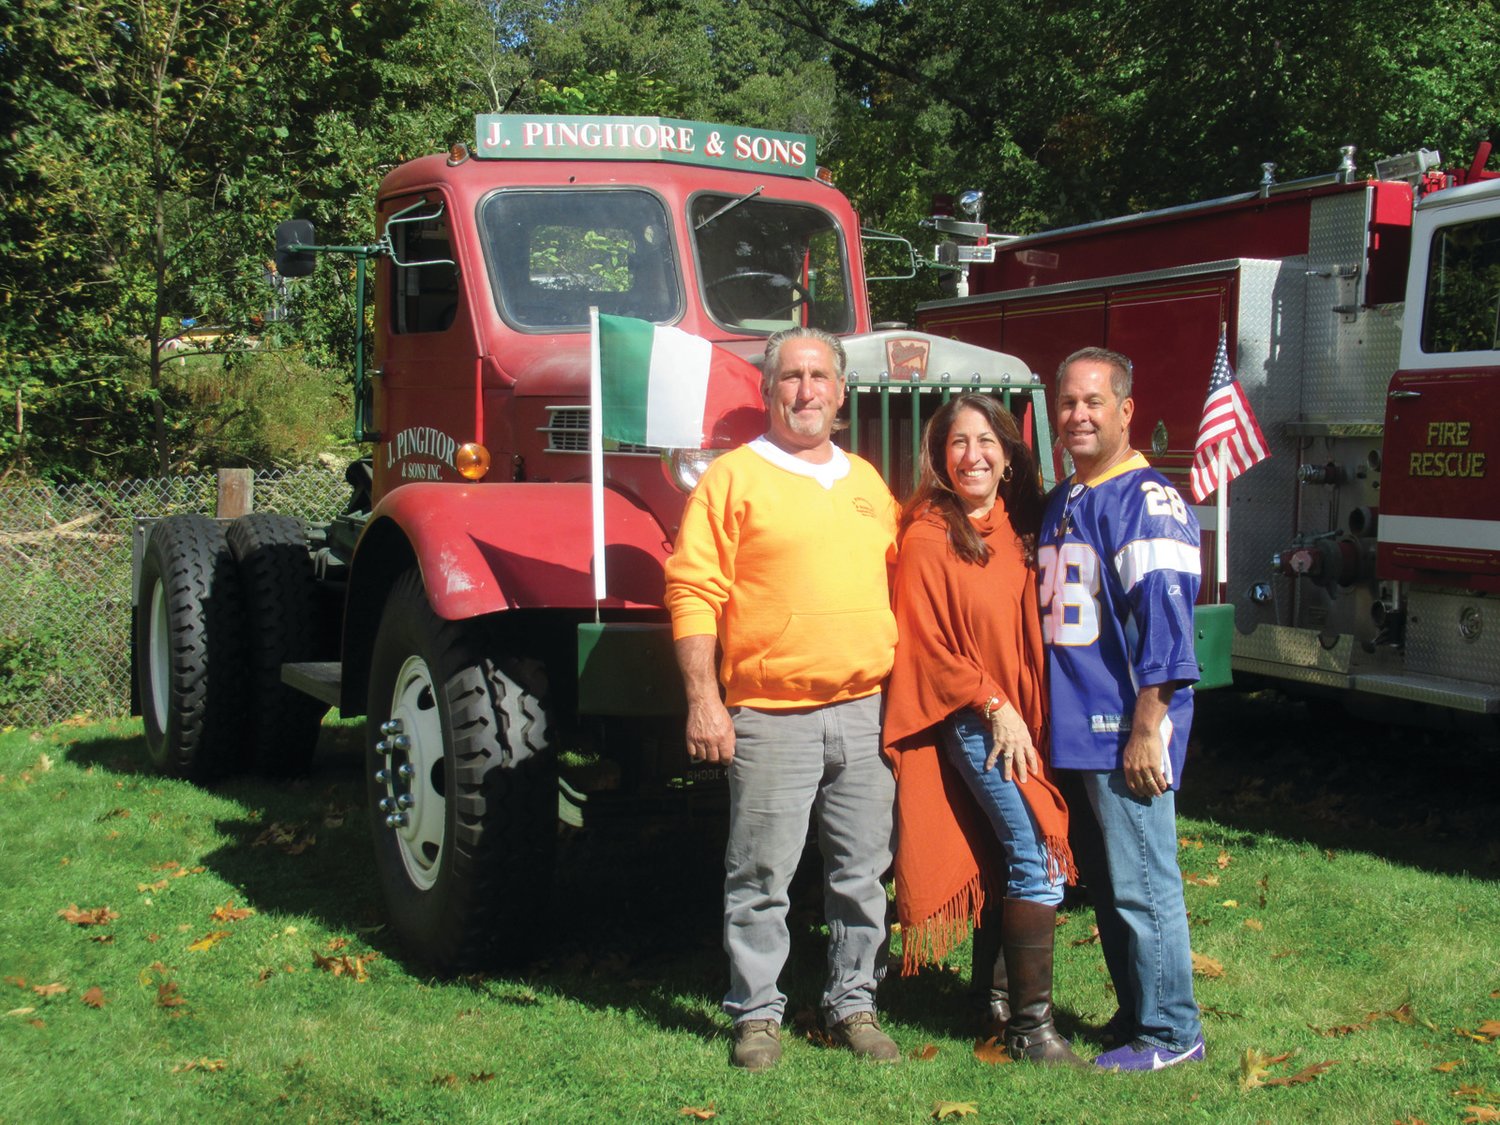 PREXY’S PALS: The Pingitores — siblings Joe, Fran, and Dave — enjoy Sunday’s sparkling sun in front of the family owned 1942 Chain-Driven Sterling which was among the more than 60 vintage vehicles on display during Sunday’s Ocean State Vintage Haulers Fall Round-up at Ron Rossi’s Christmas Tree Farm in Cranston.